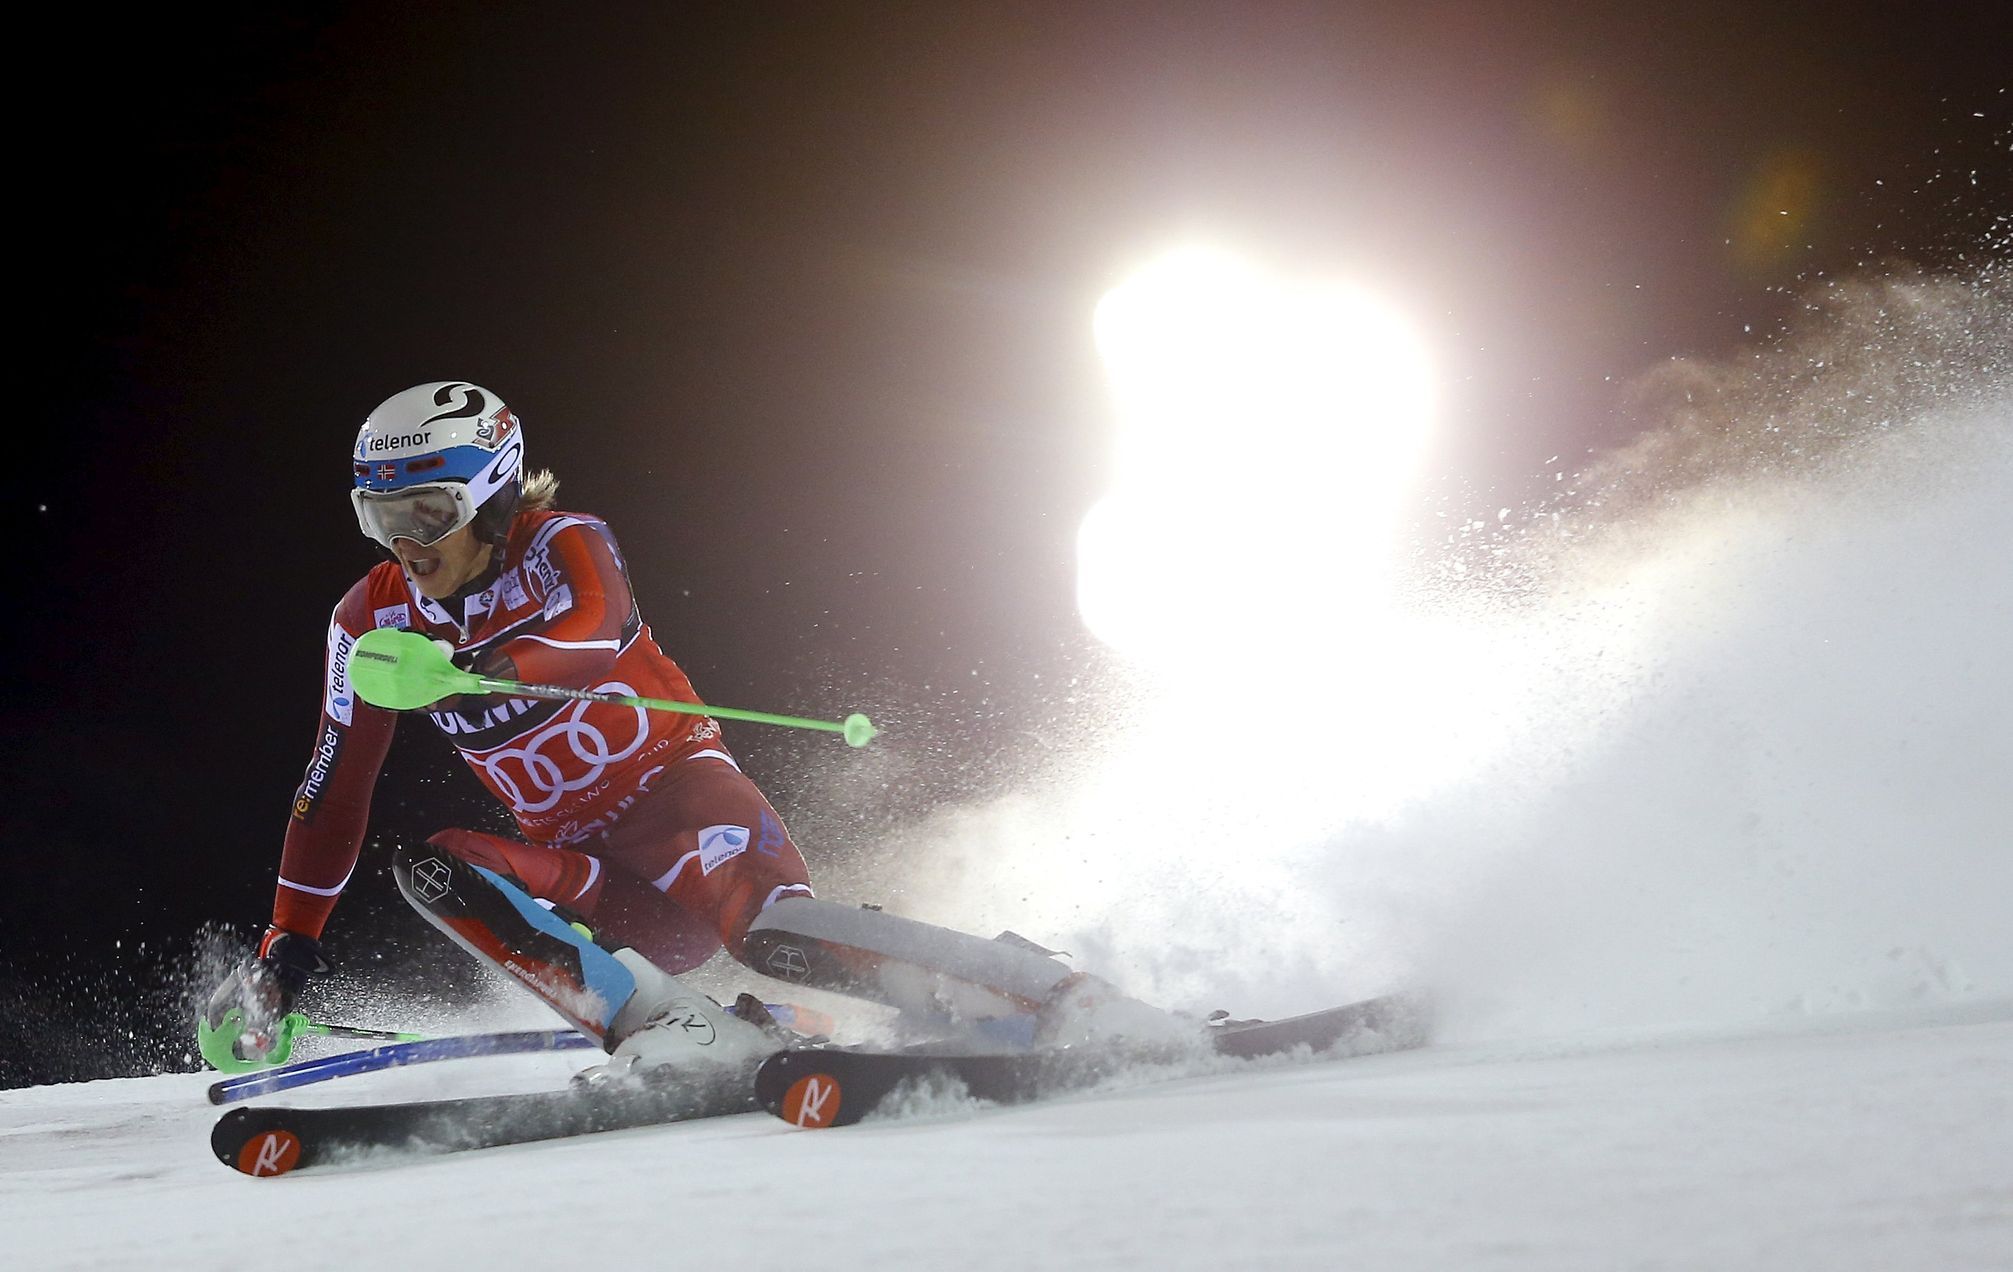 Kristoffersen of Norway clears a gate during the first run in the men's slalom at the Alpine Skiing World Cup in Madonna di Campiglio